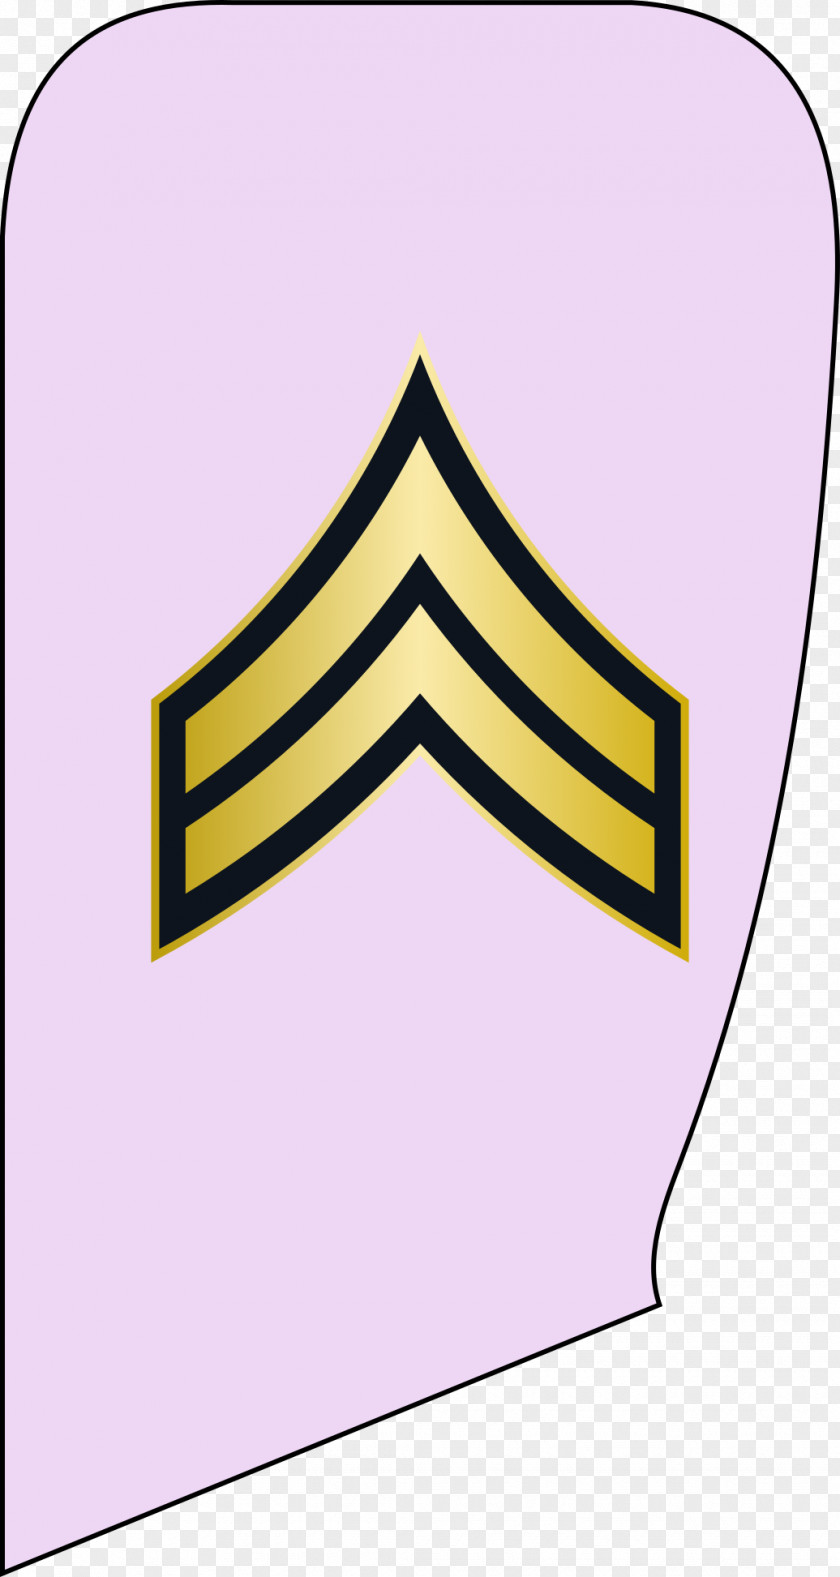 Air Force Sergeant First Class Chevron Military Rank PNG